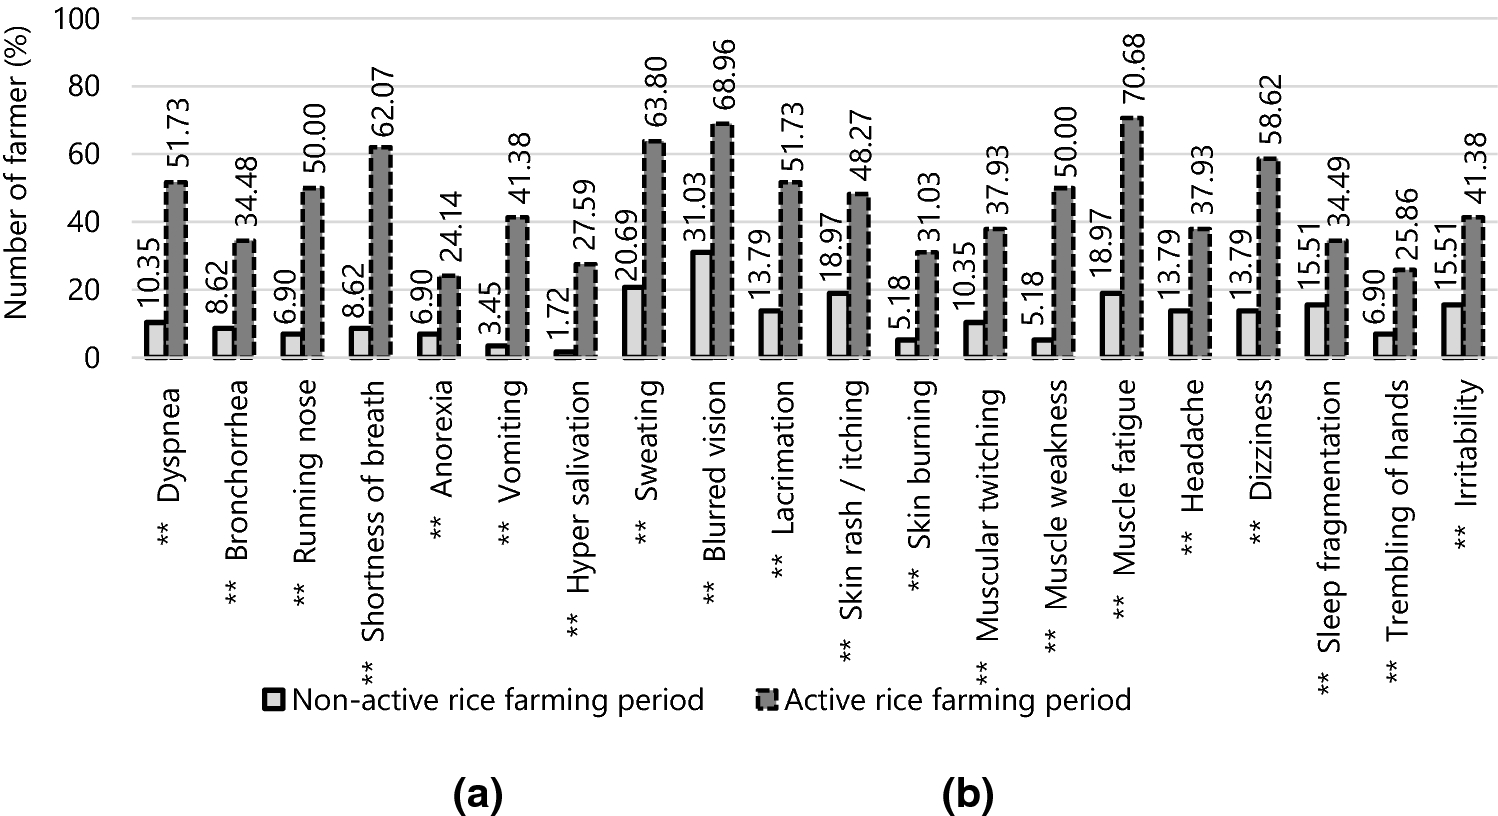 Pesticide toxicity assessment and geographic information system (GIS) application in small-scale rice farming operations, Thailand Scientific Reports